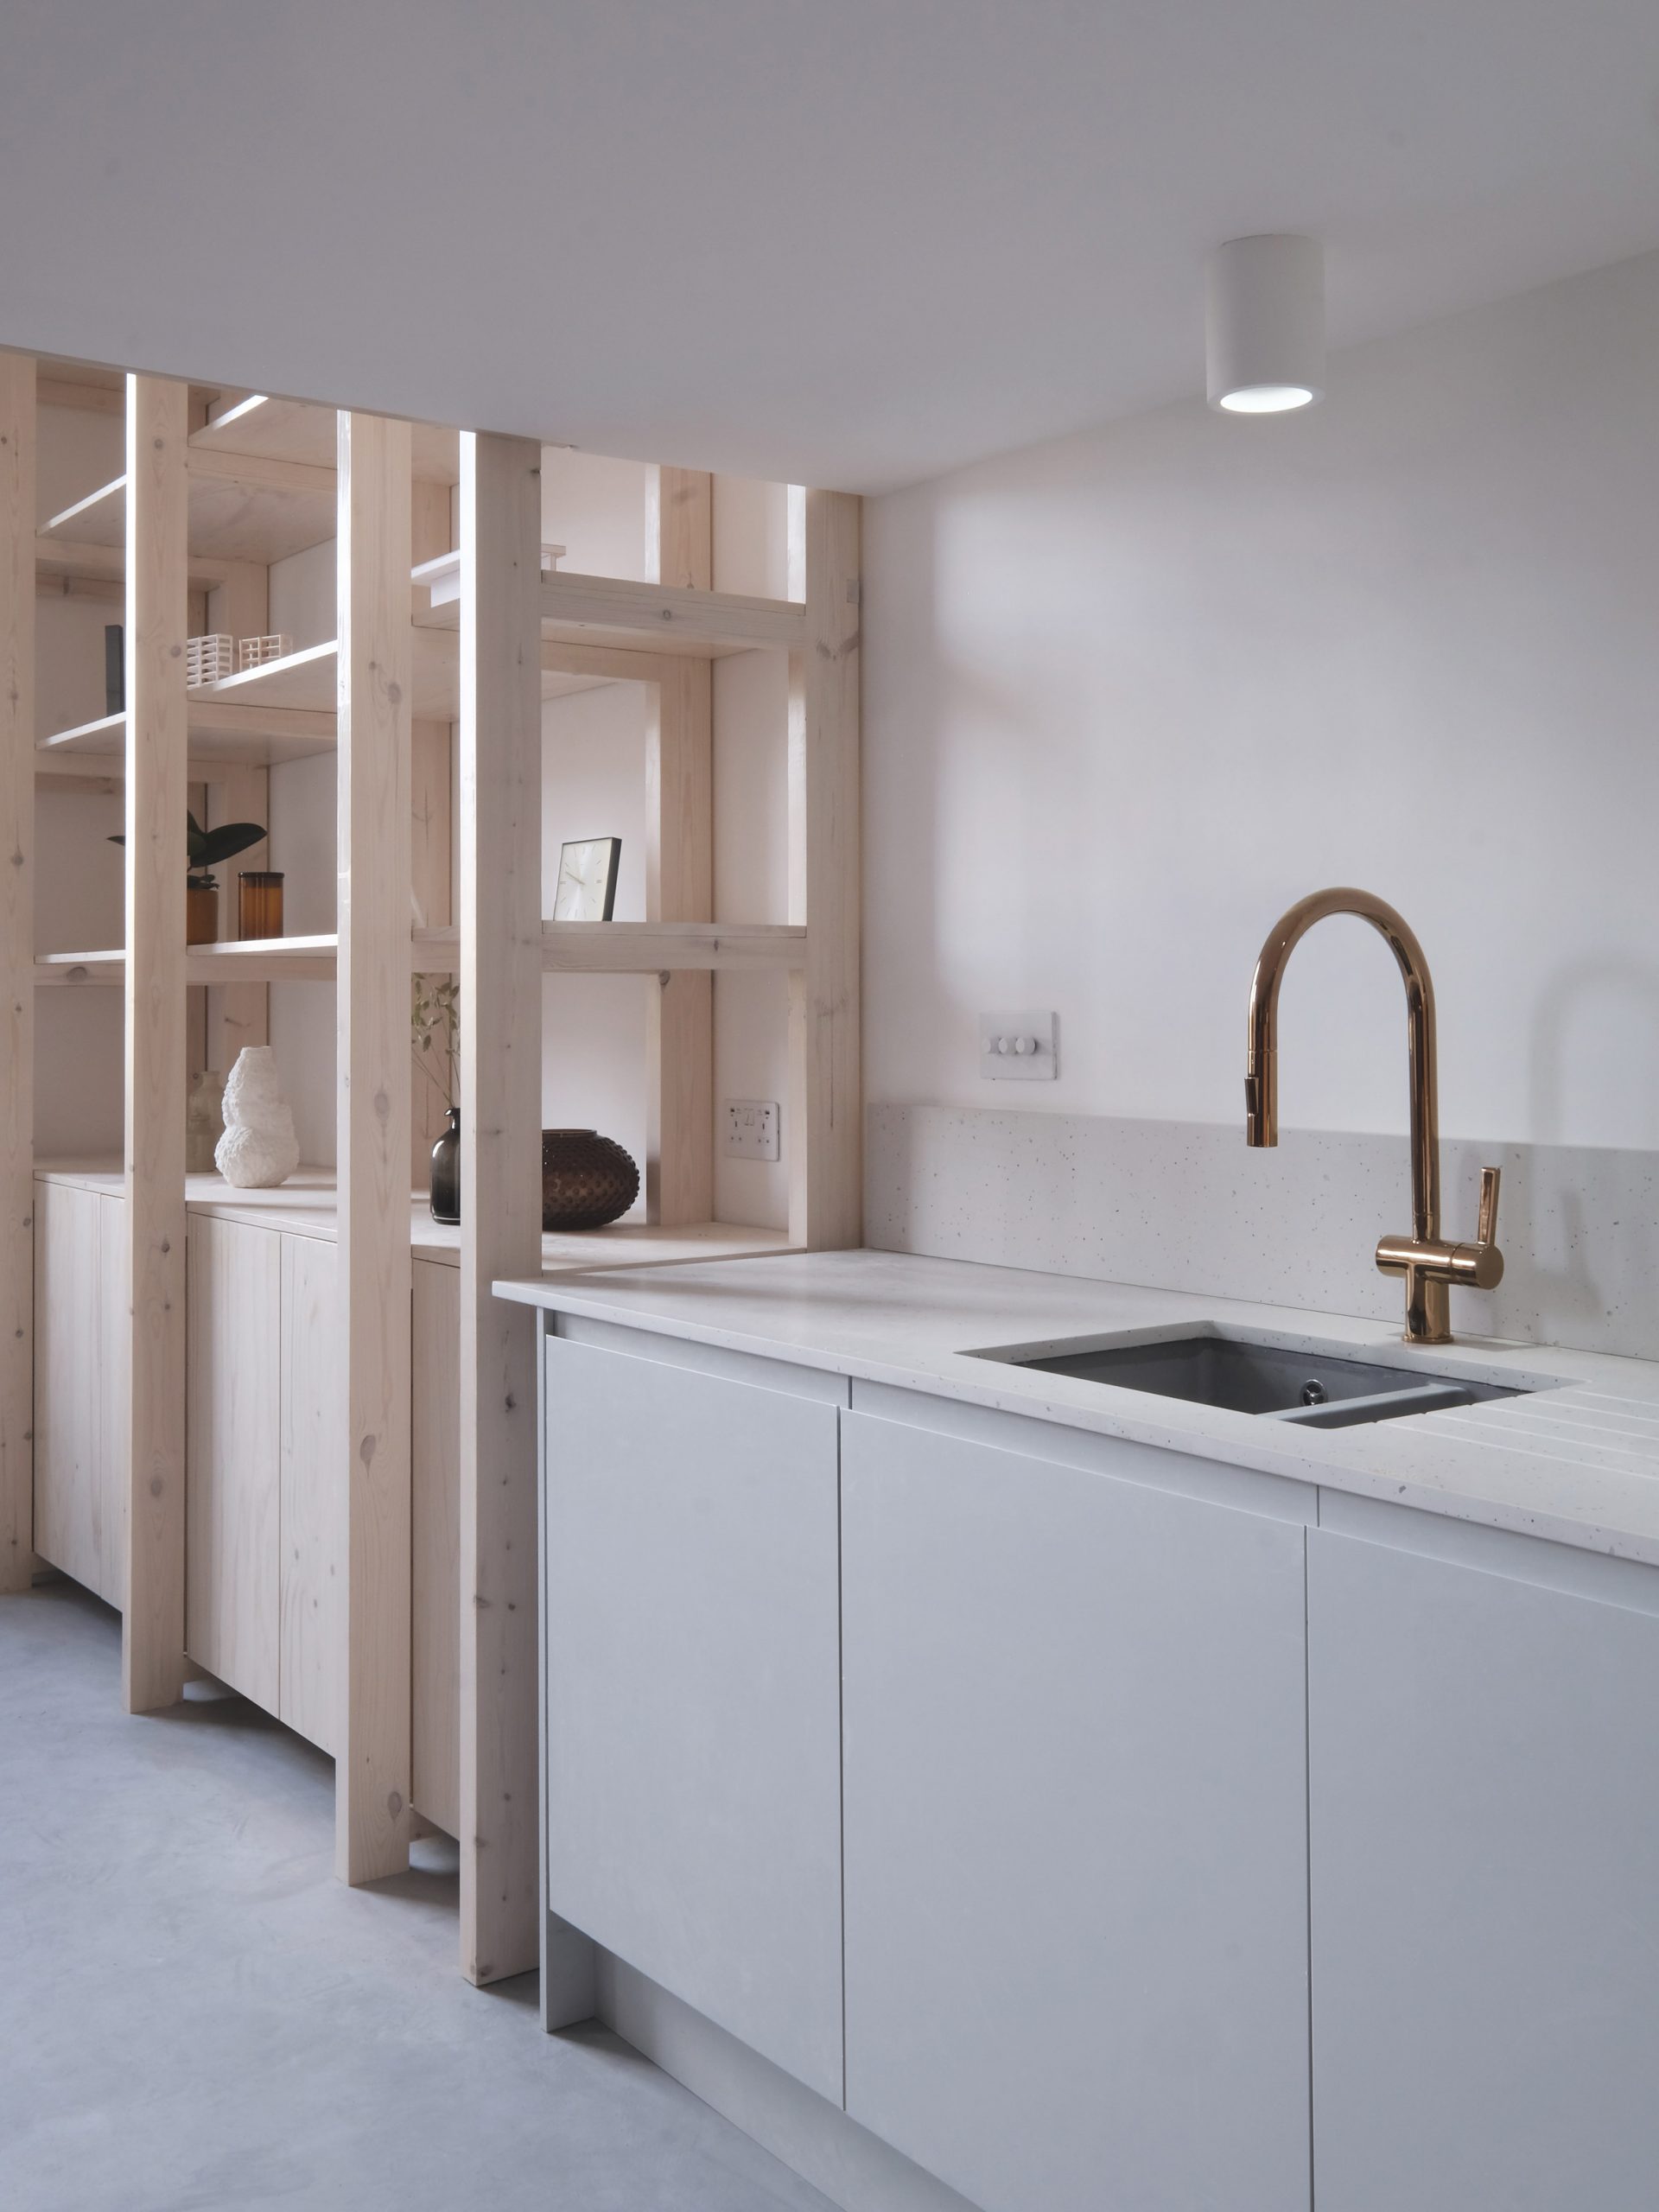 Kitchen and wooden shelving unit from Bow Quarter Apartment interior